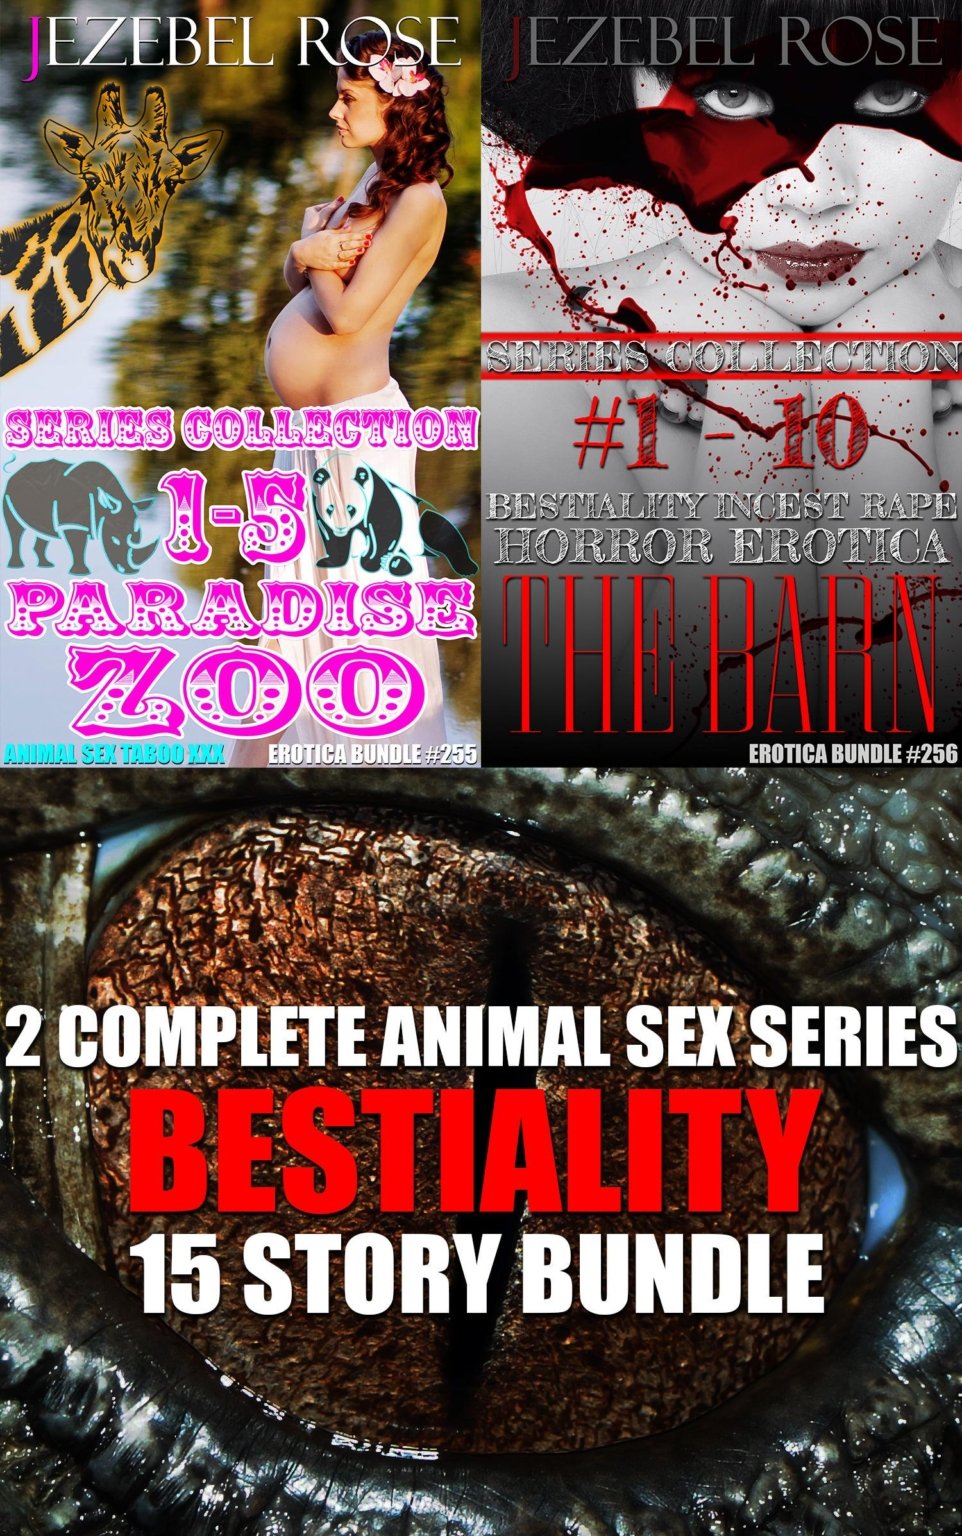 15 Story Bestiality Erotica Bundle: The Barn & Paradise Island Complete Series